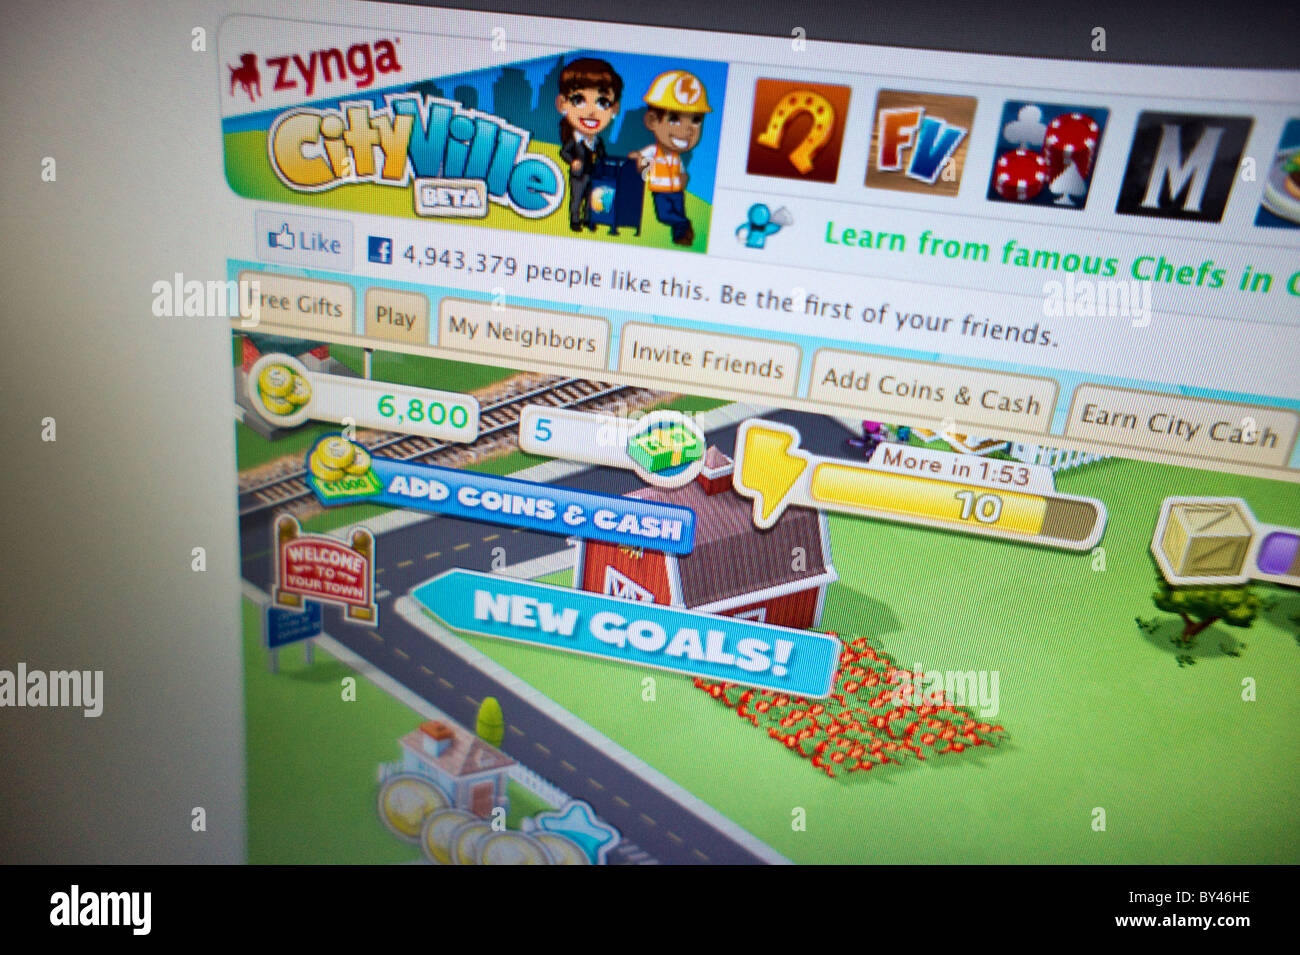 A screenshot of the popular Zynga CityVille game on the Facebook social networking website Stock Photo